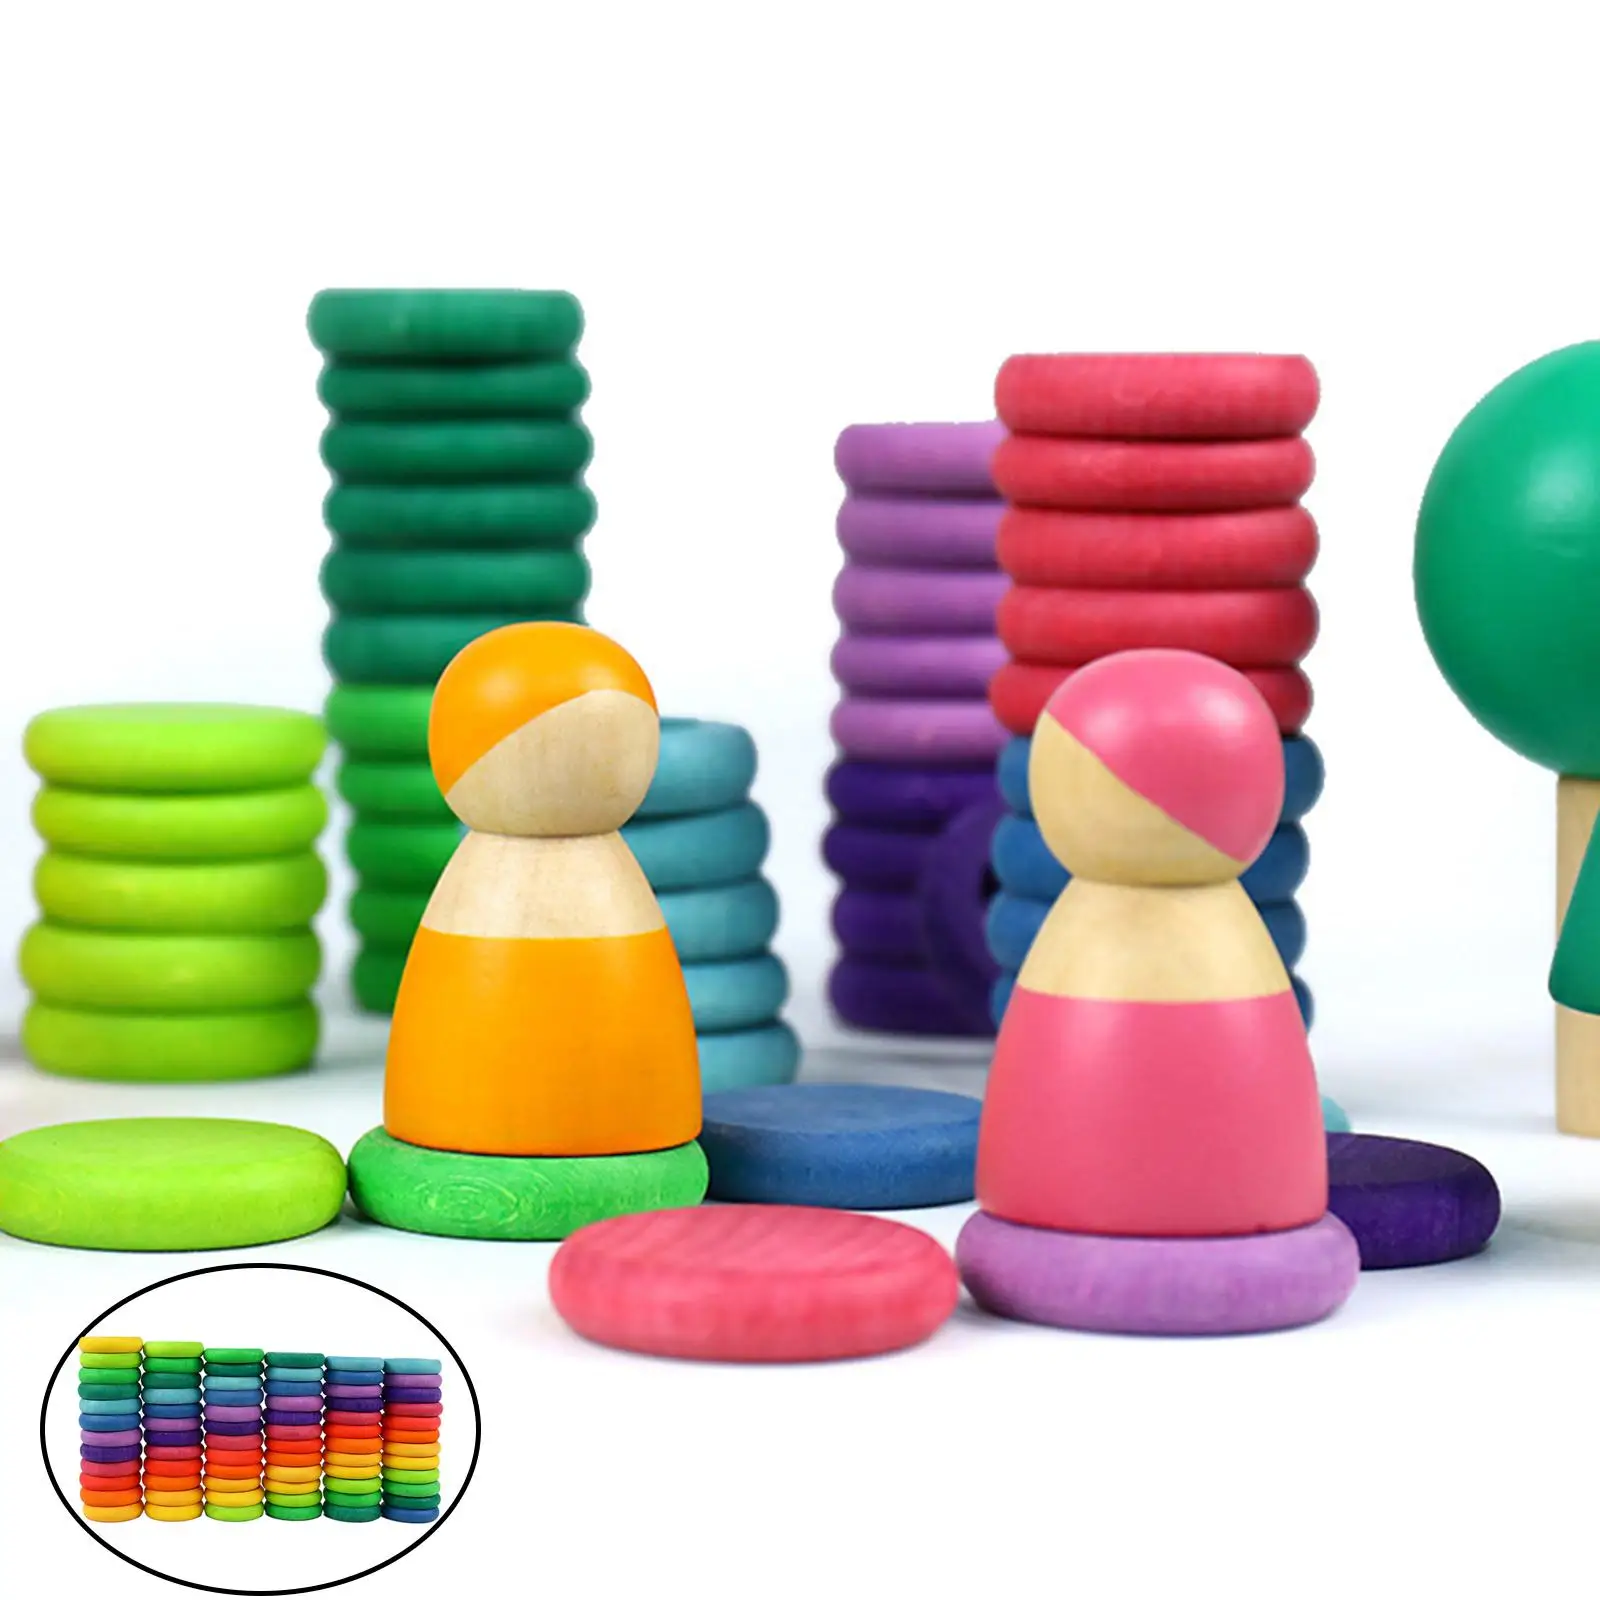 72/Set Round Blocks Stacking Counting Baby Development Toy for Toddler